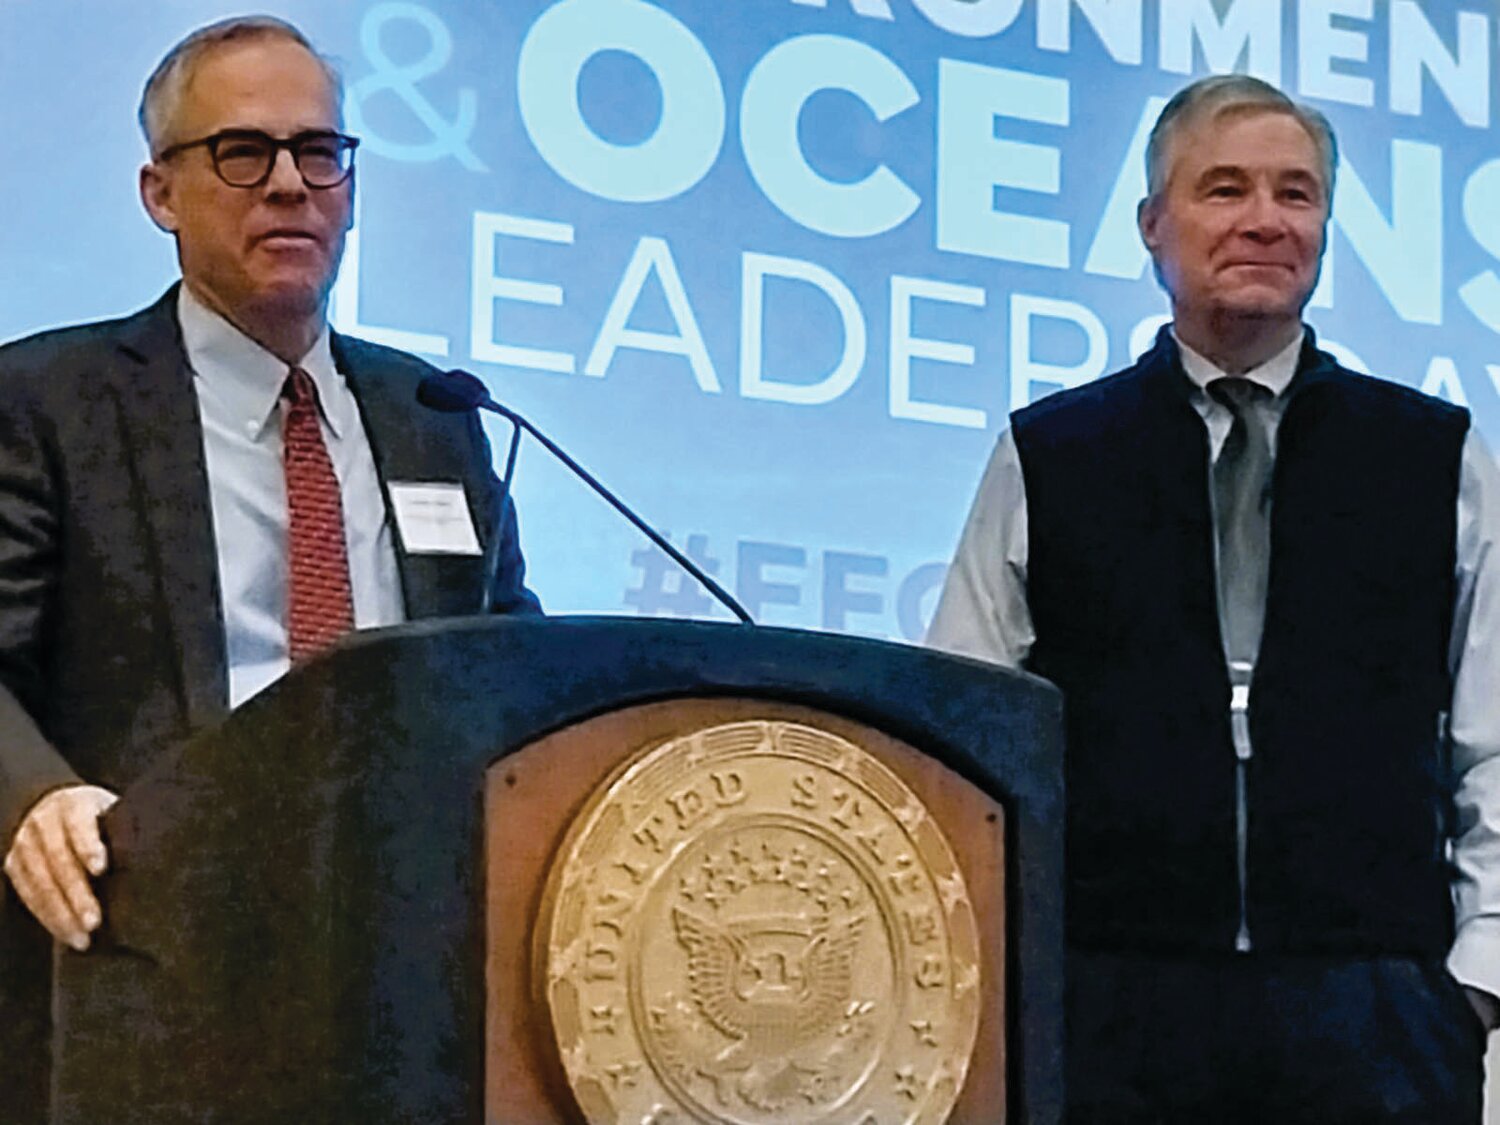 PERSON OF THE YEAR: Jonathan Stone, former Executive Director of Save the Bay, was presented this year’s person of the year award  by Senator Sheldon Whitehouse at the 14th Annual Energy, Environment and Oceans Leaders Day.